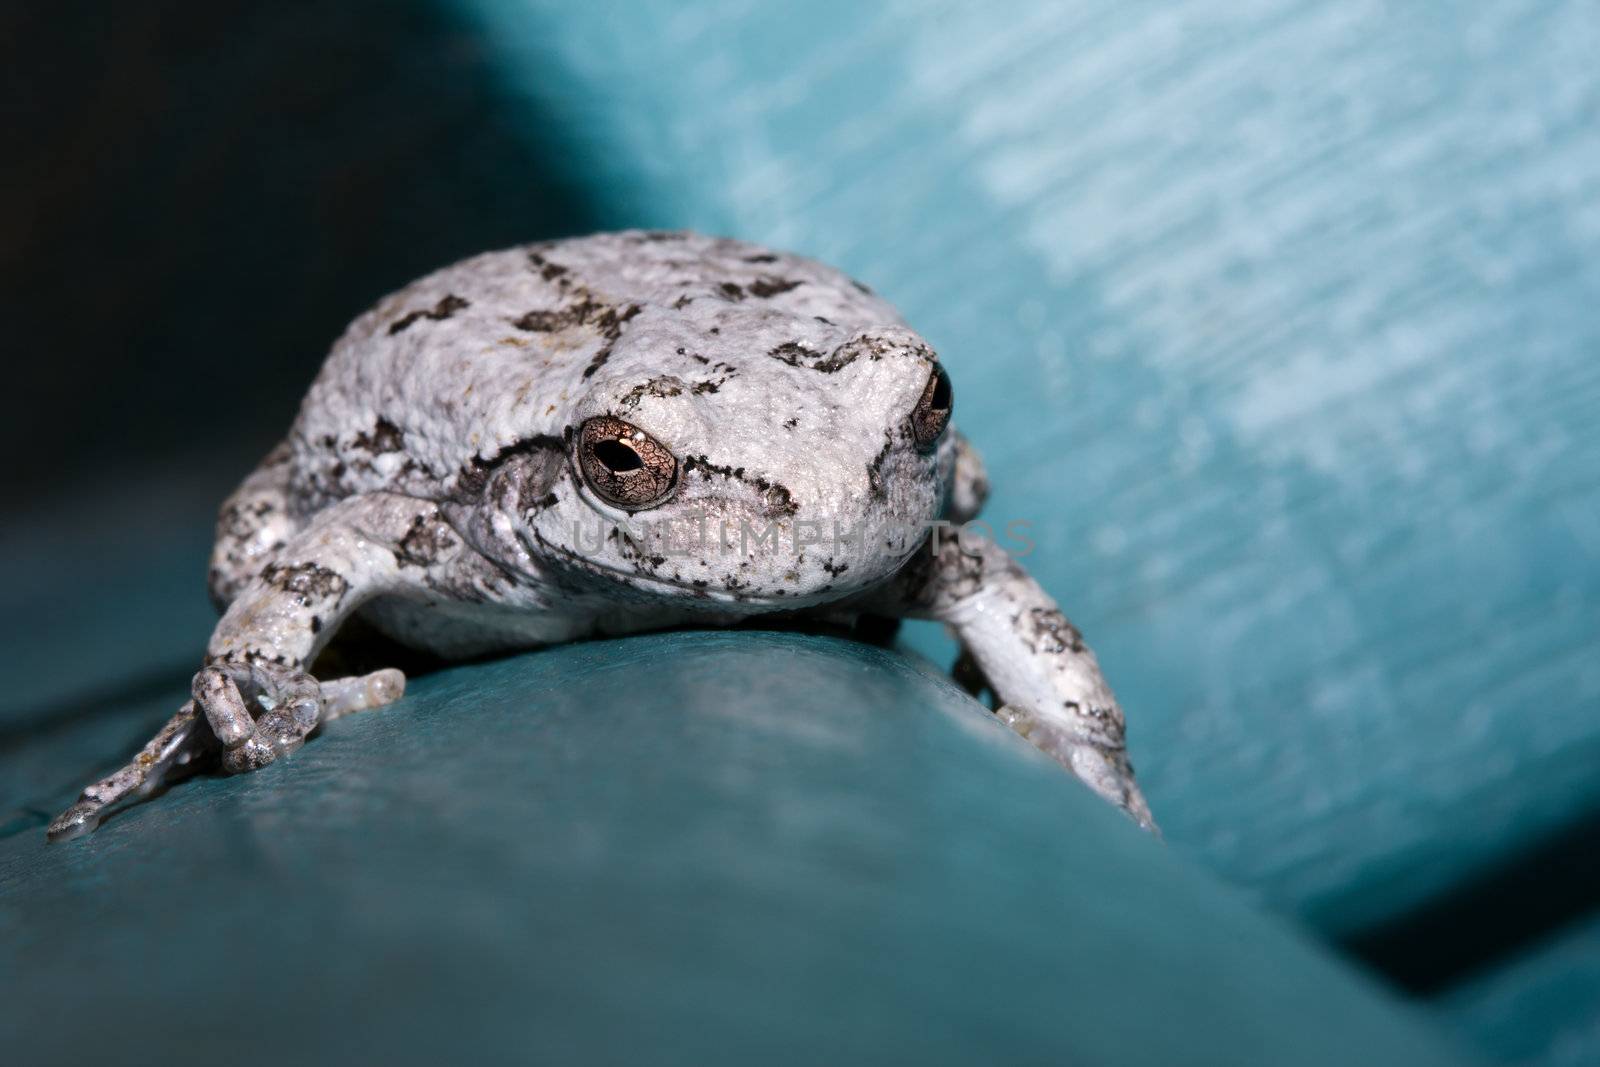 Cope's Gray Tree Frog clinging to a chair.